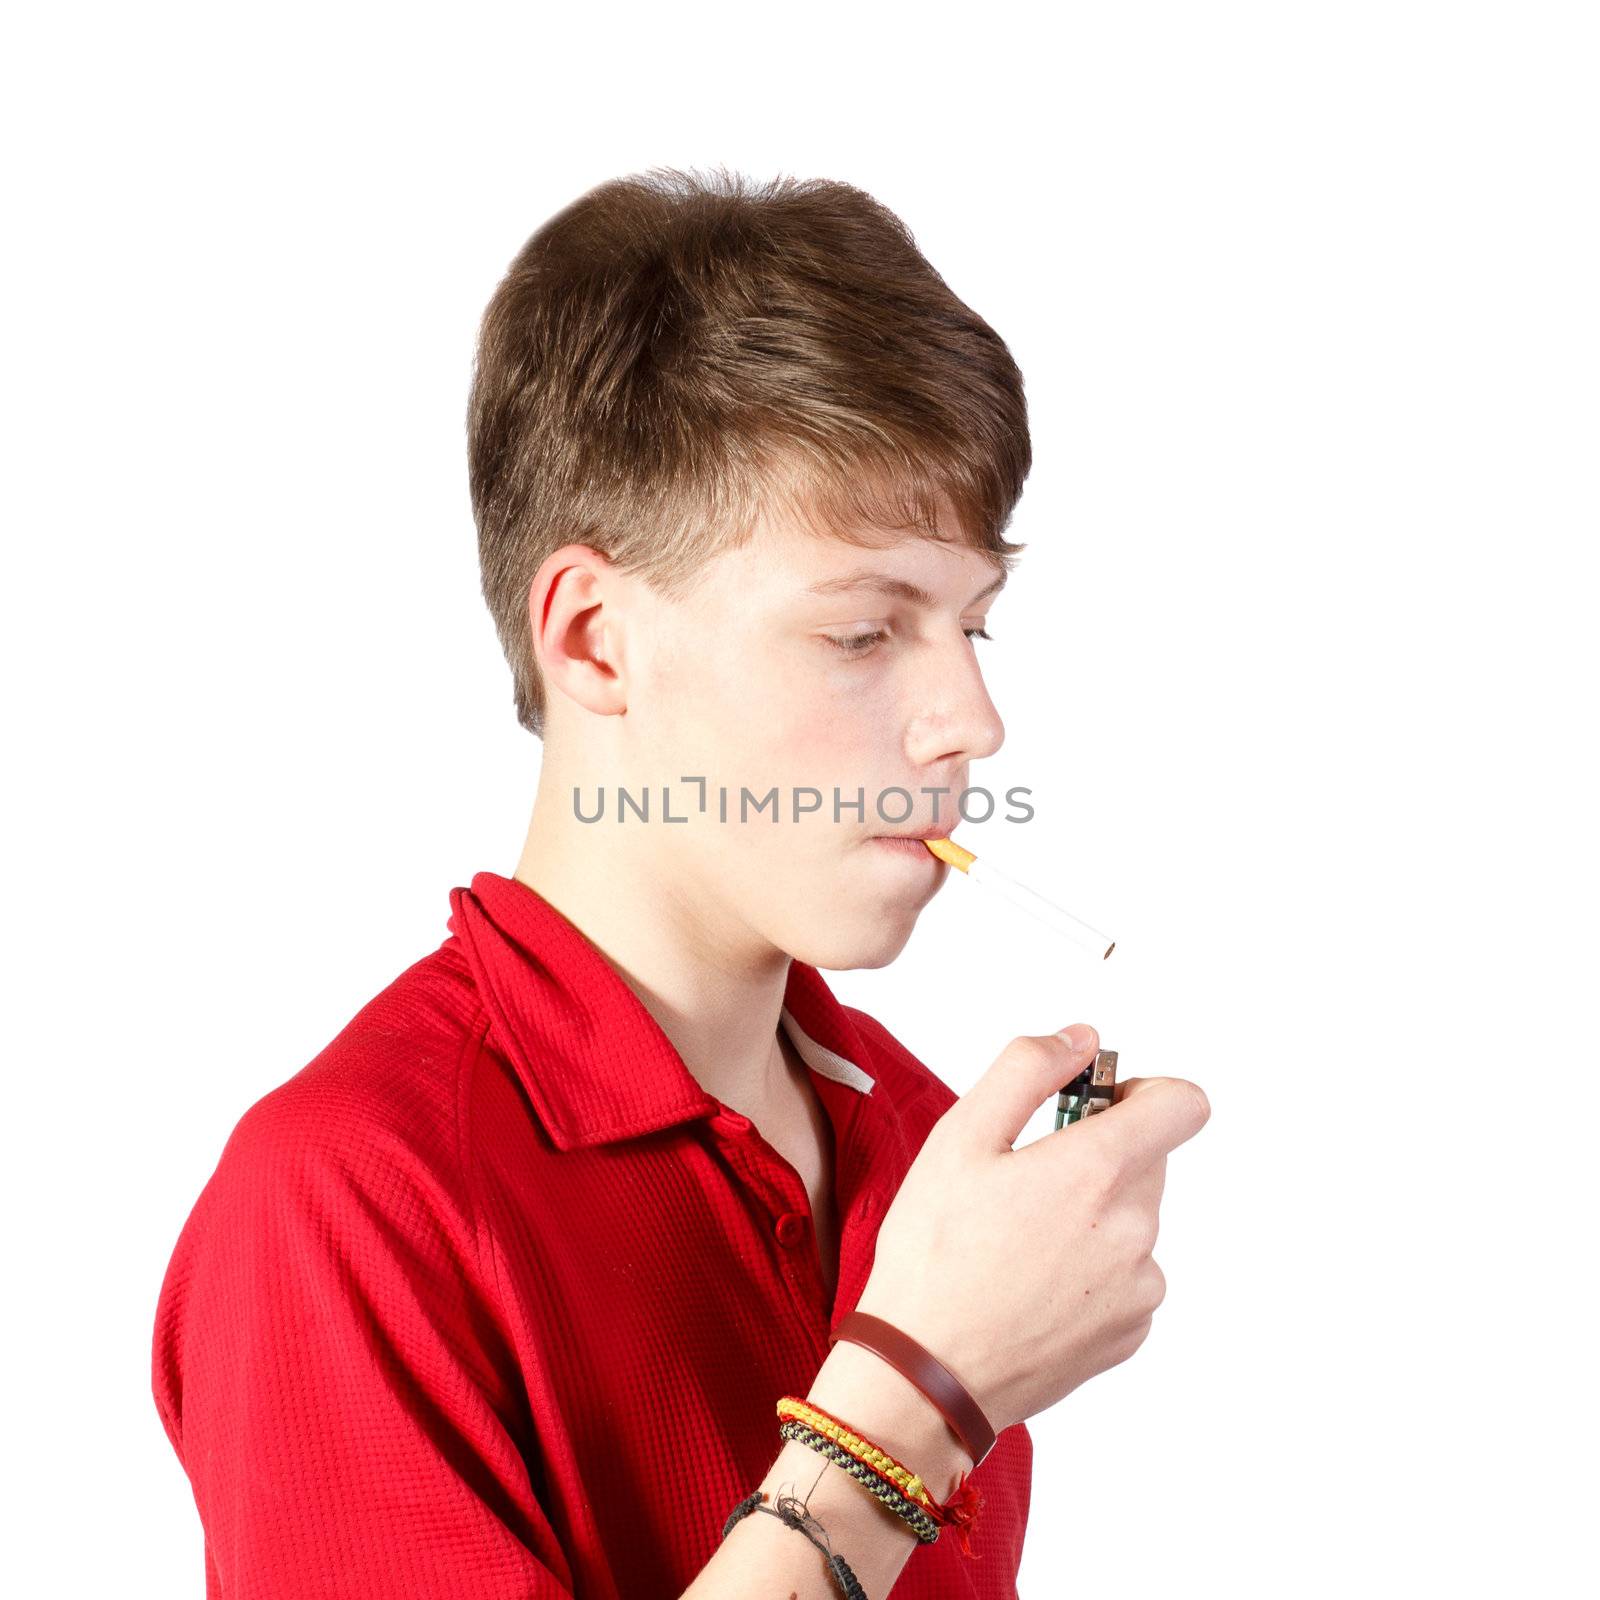 a teenage boy trying to smoke a cigarette against white background